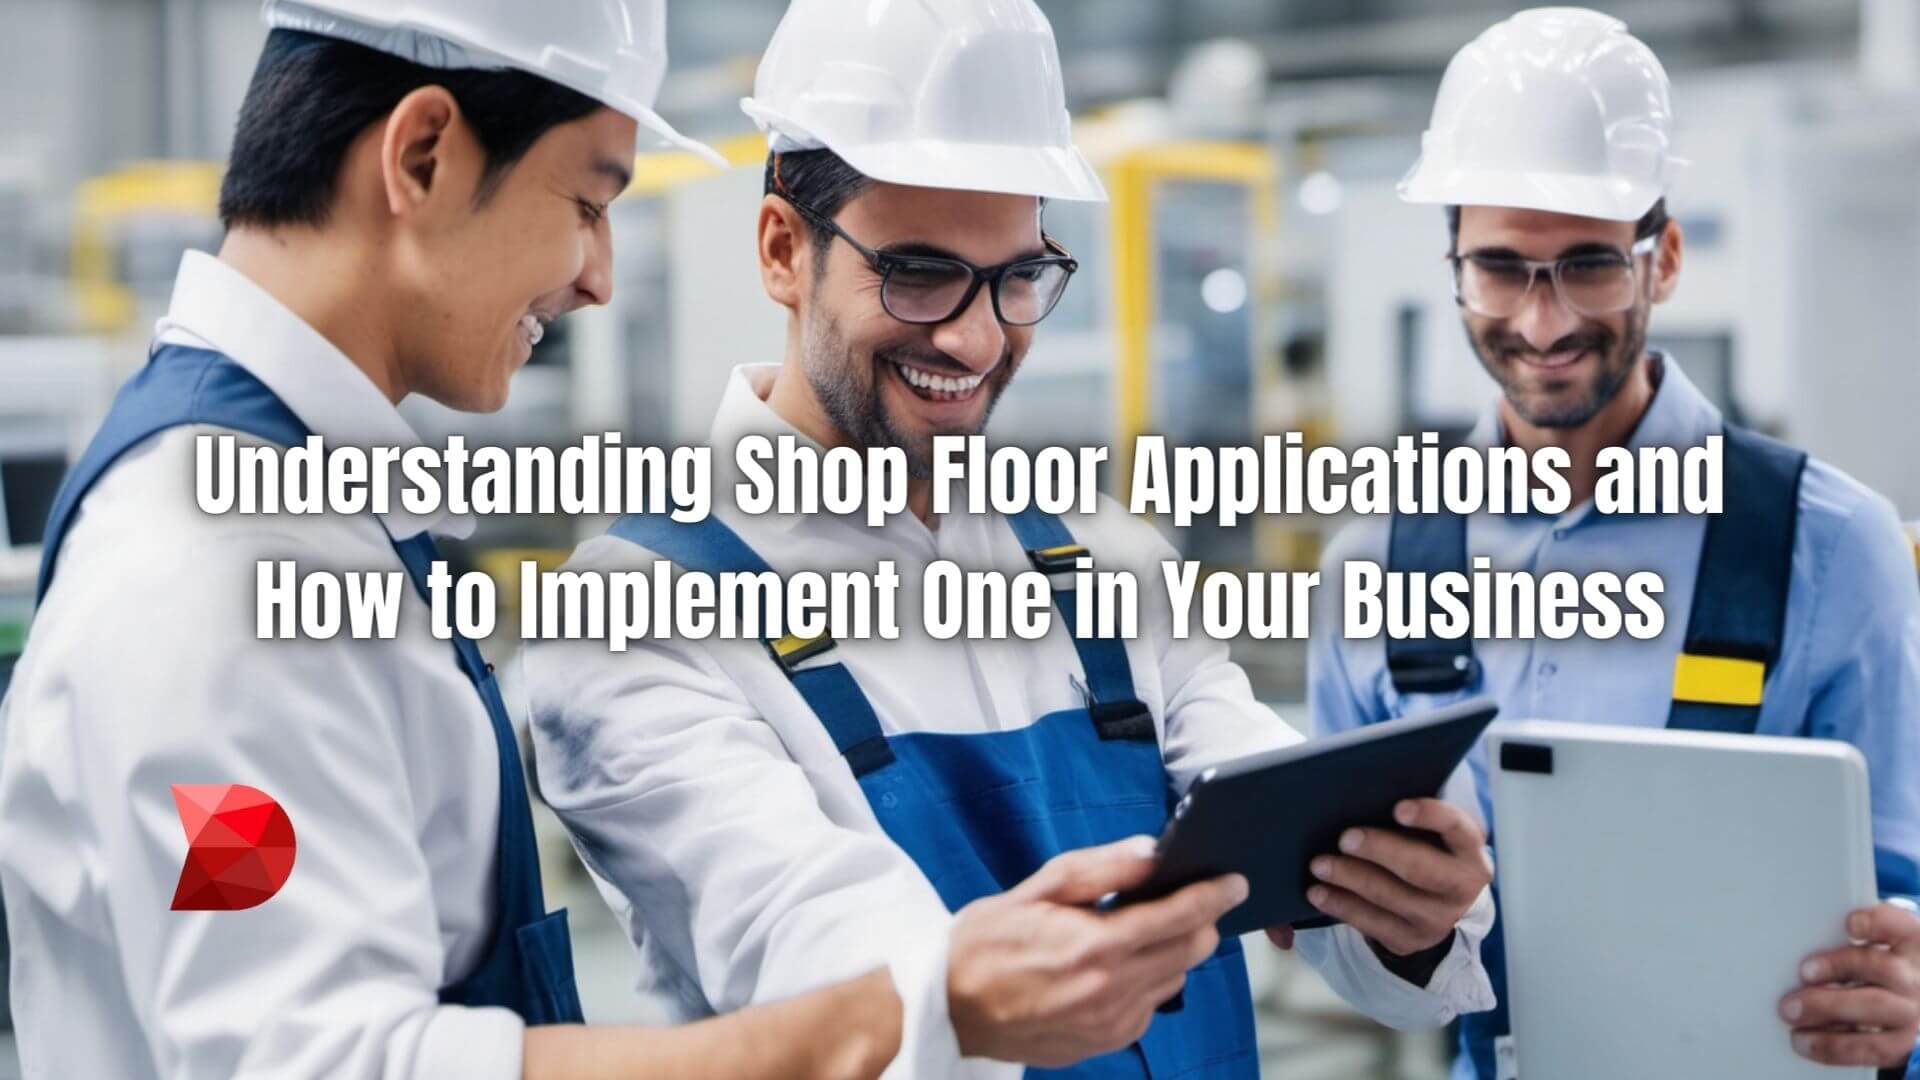 Unlock business potential with shop floor applications. Click here to learn implementation strategies in this comprehensive guide.